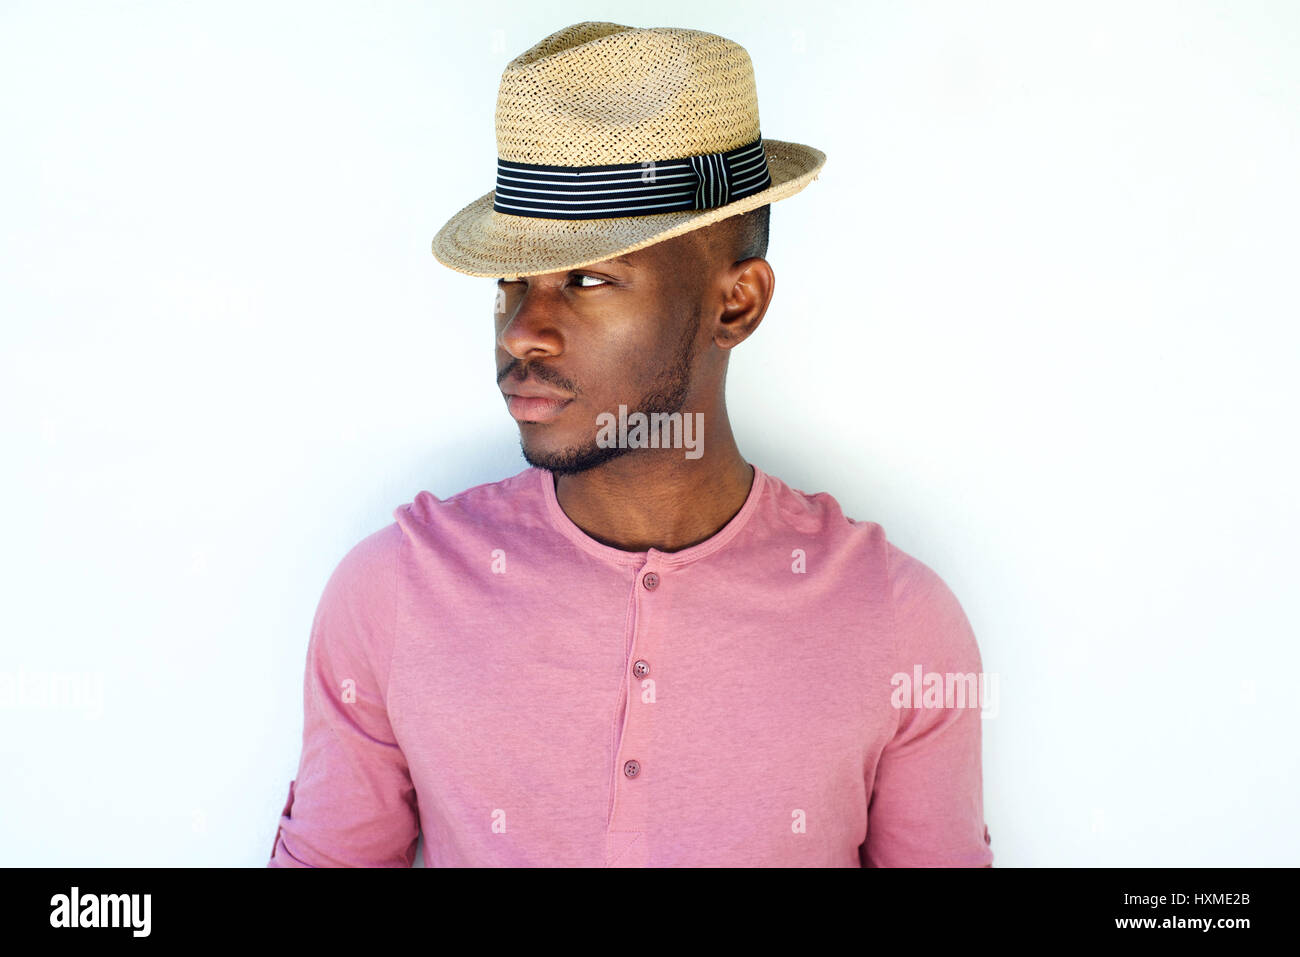 Close up portrait of cool young black male fashion model with hat against white background Stock Photo